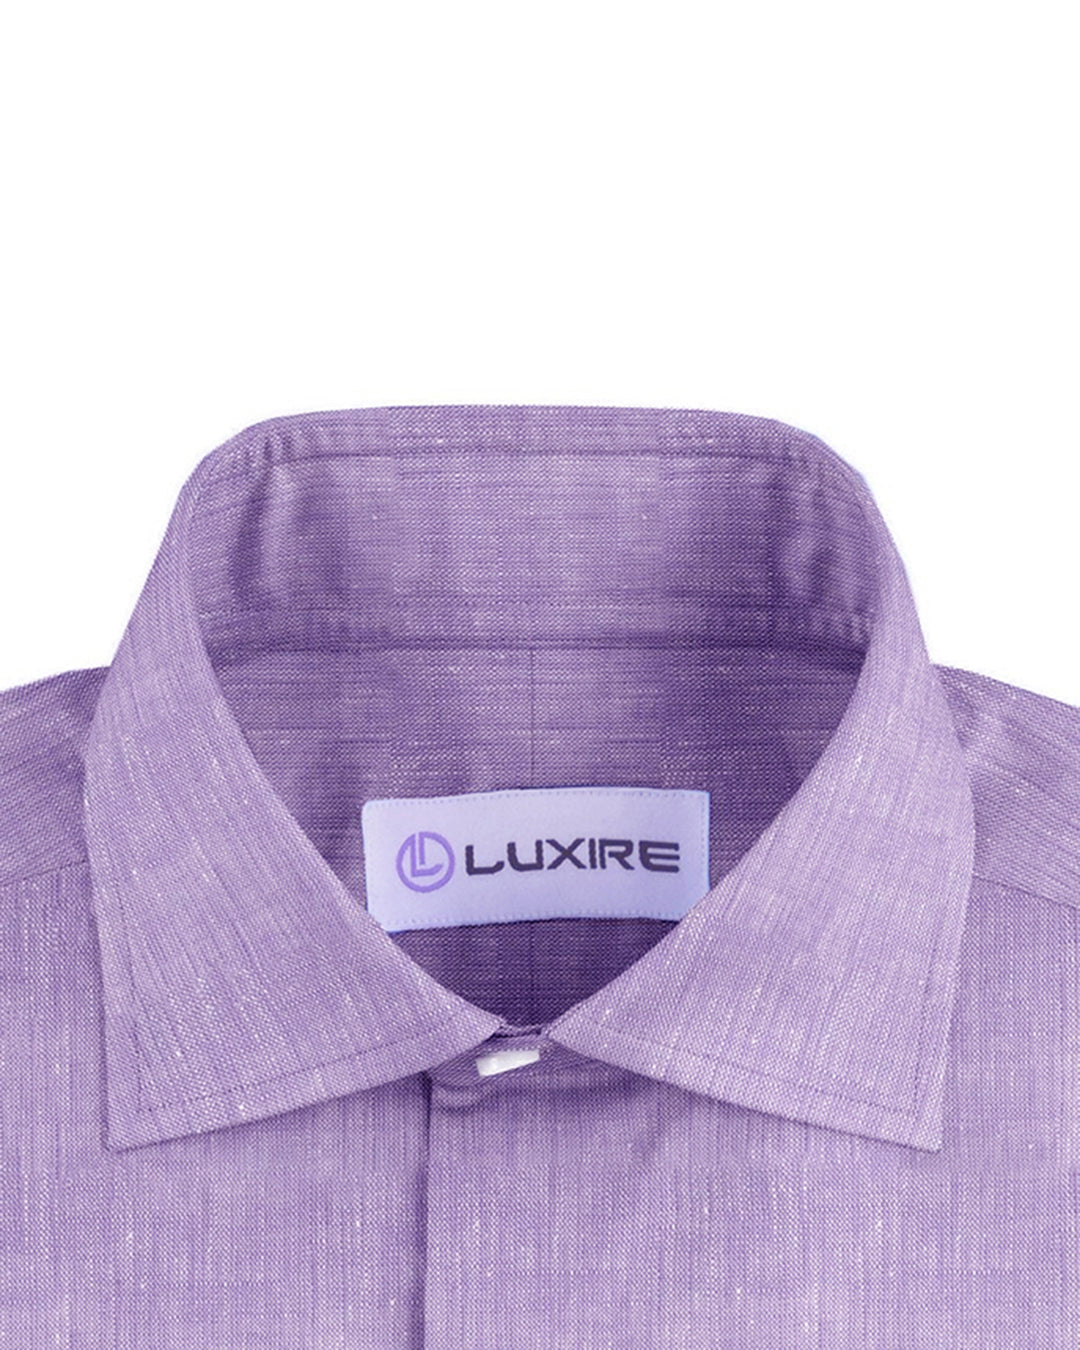 Collar of the custom linen shirt for men in purple chambray by Luxire Clothing